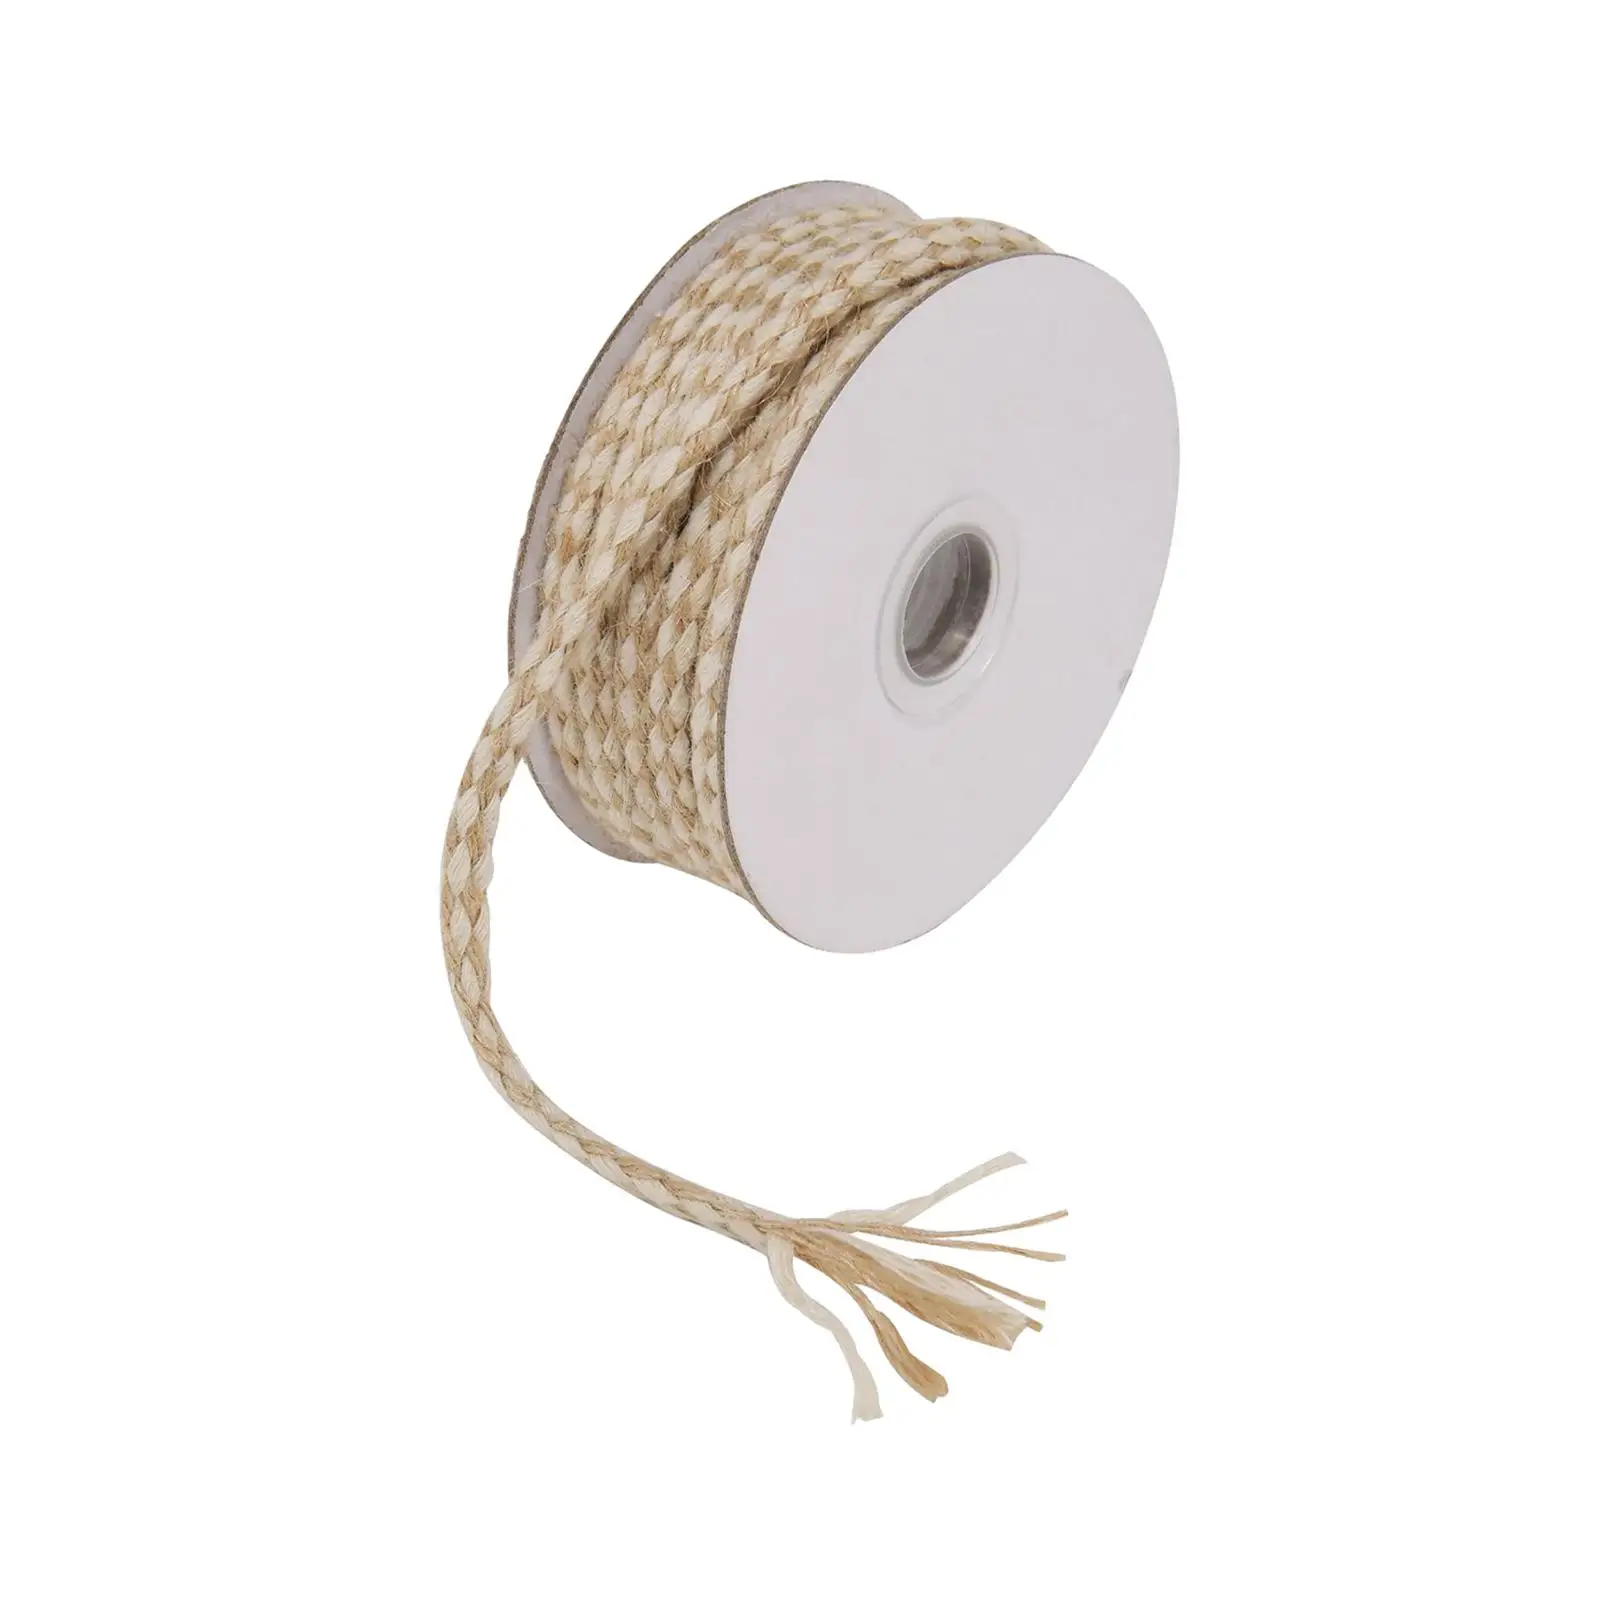 Jute String Twine Decorative Twine Rope Cord Present Wrapping Cord Christmas